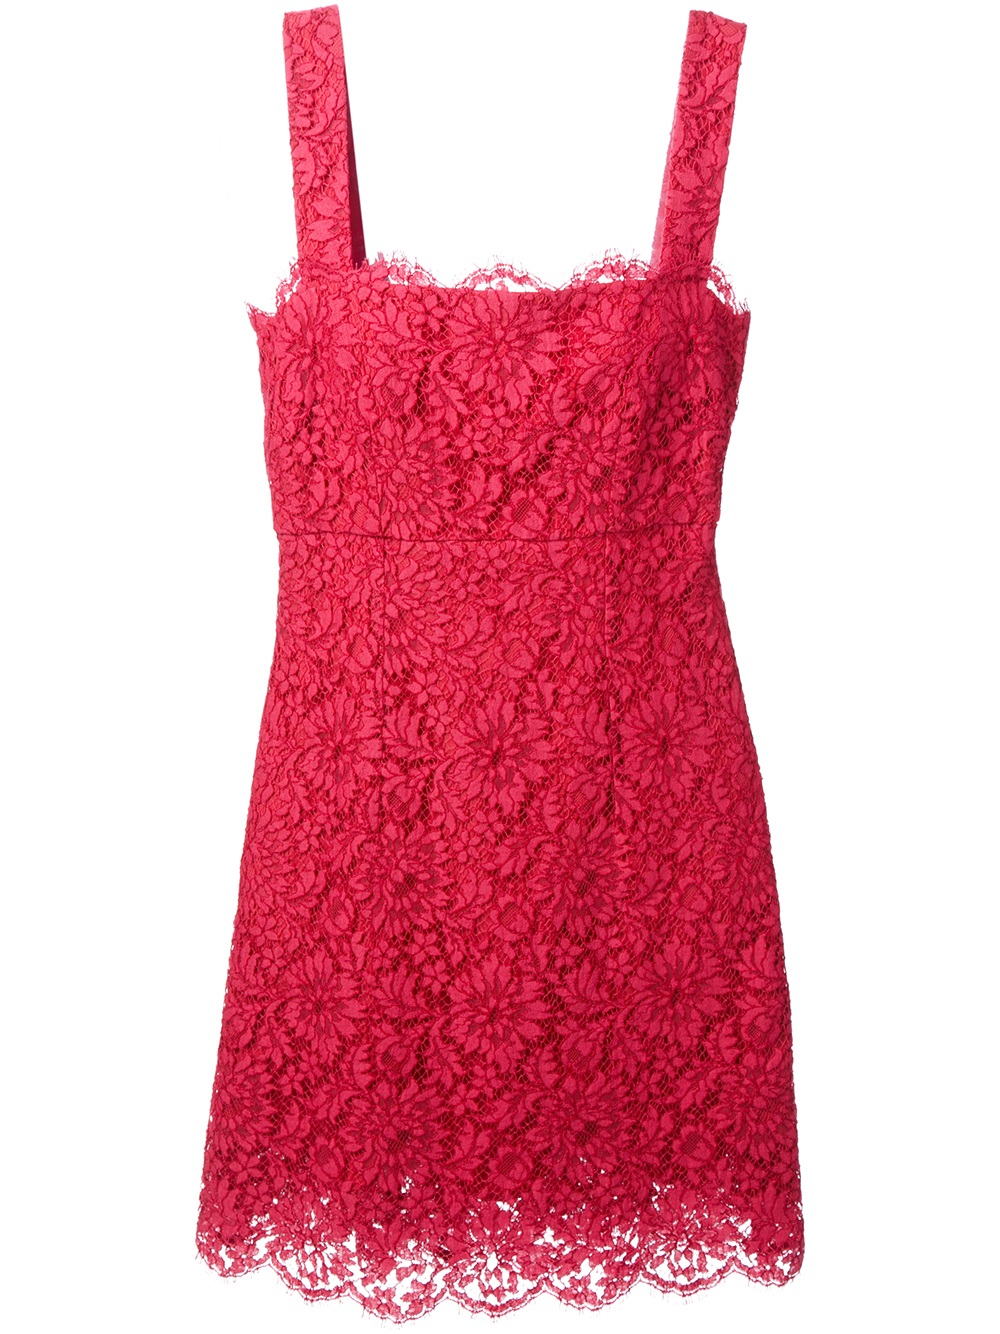 Dolce & gabbana Sleeveless Lace Dress in Red | Lyst